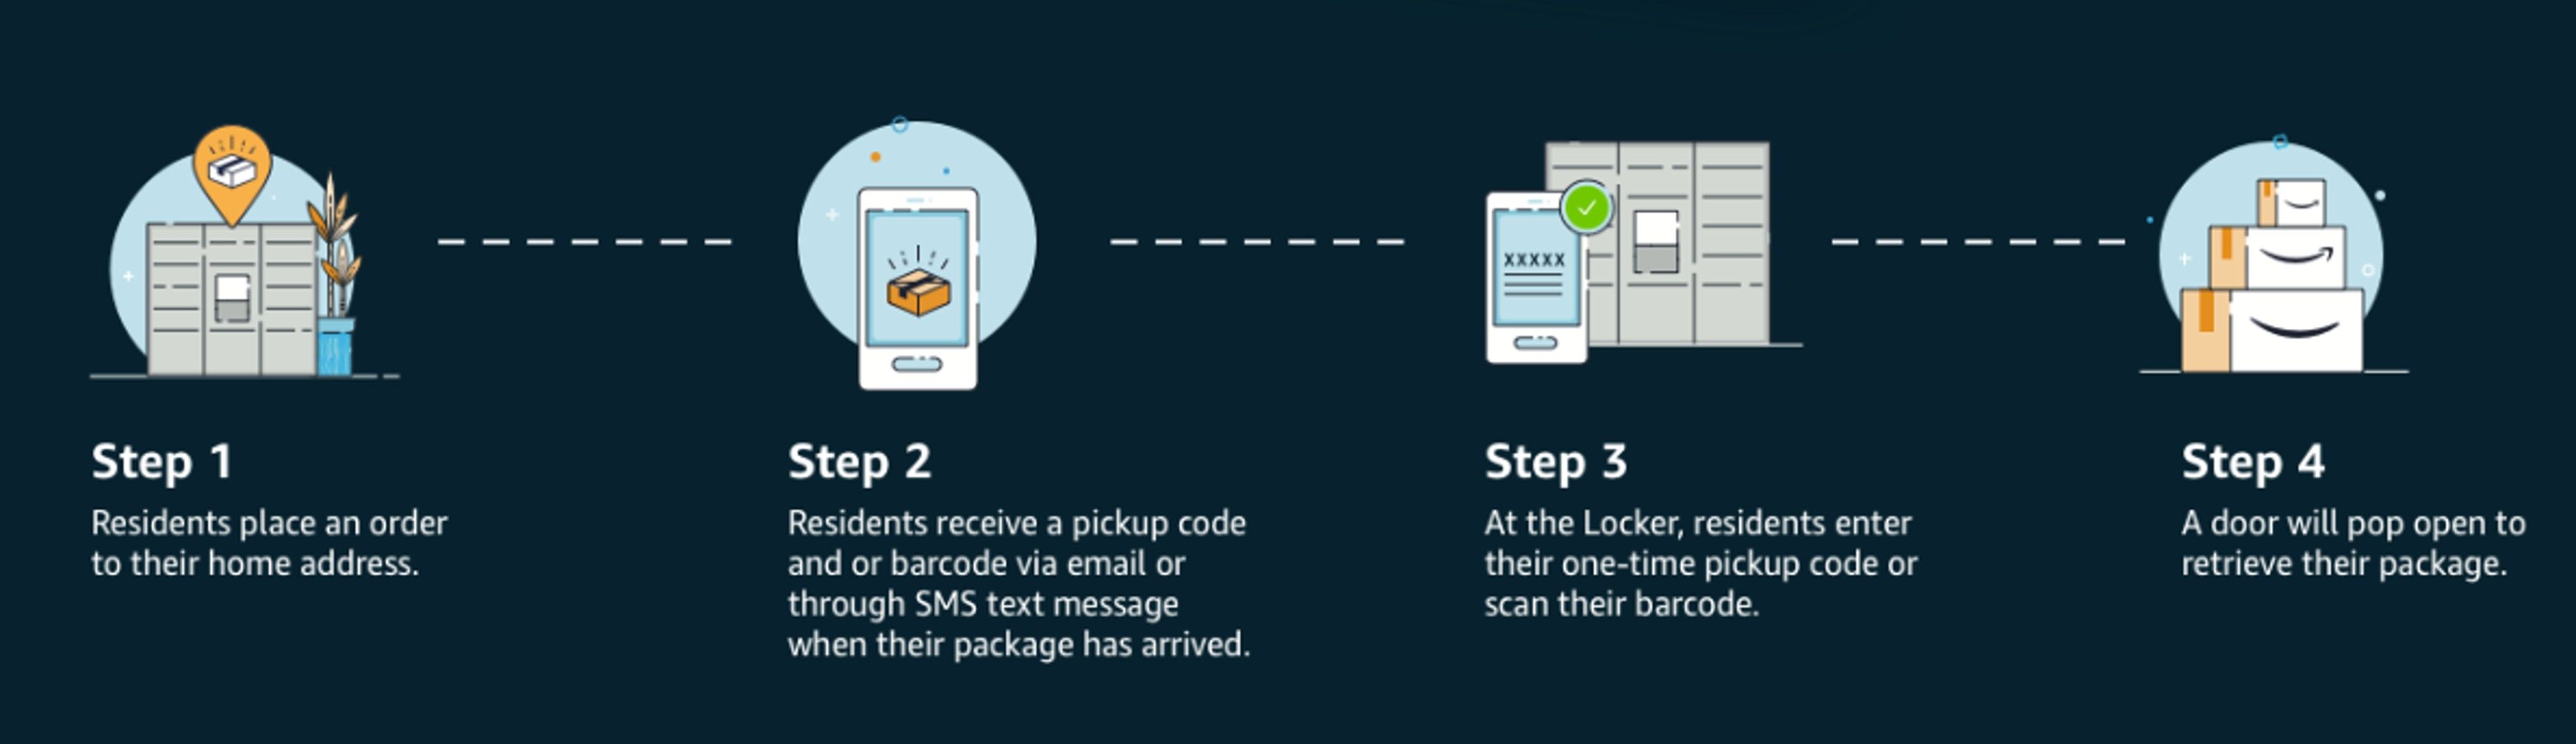 the amazon apartment locker order process in four steps